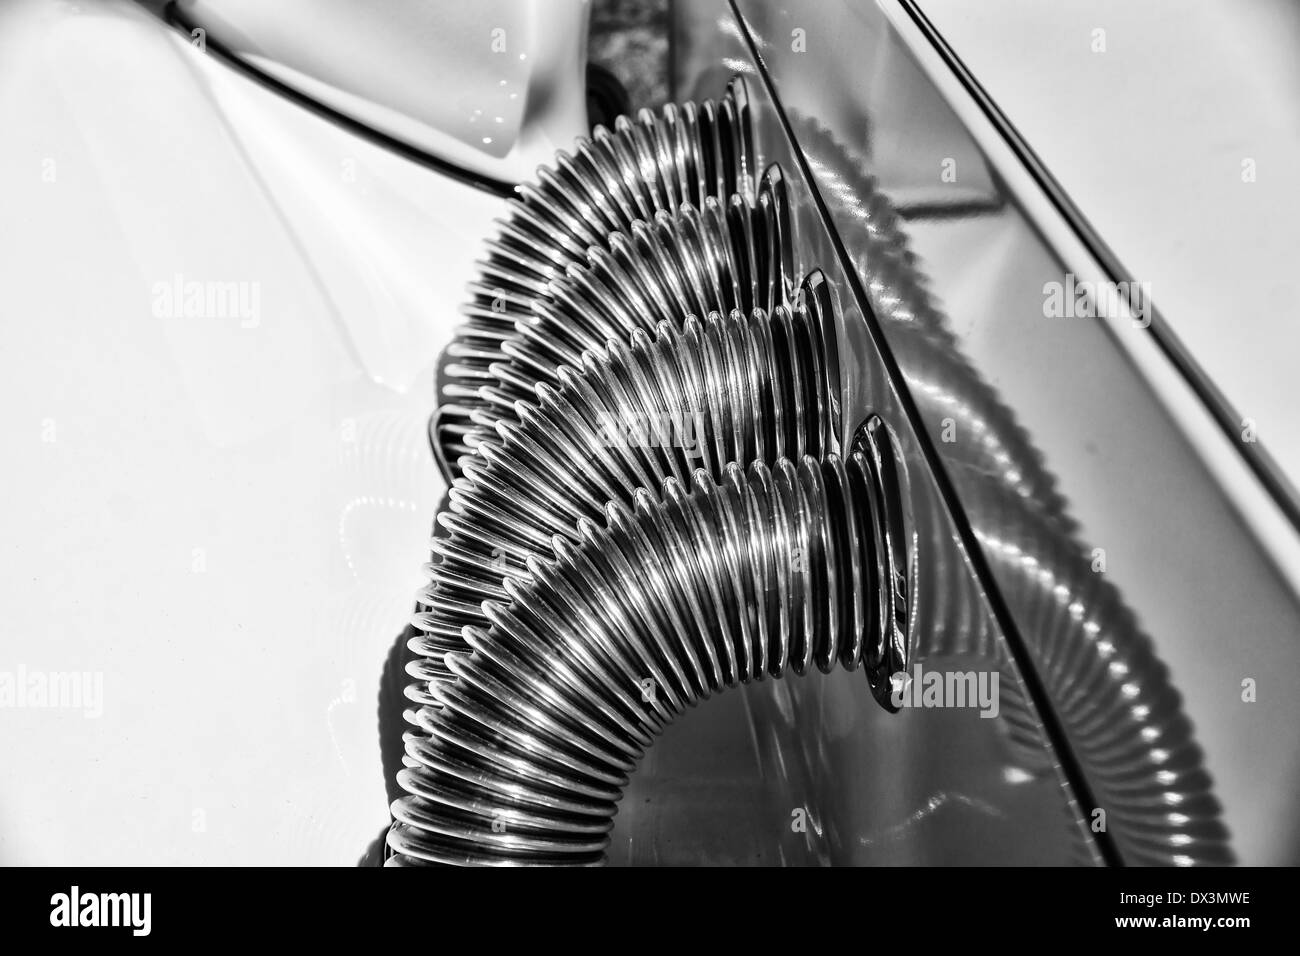 Car exhaust manifold. Black and white. Stock Photo